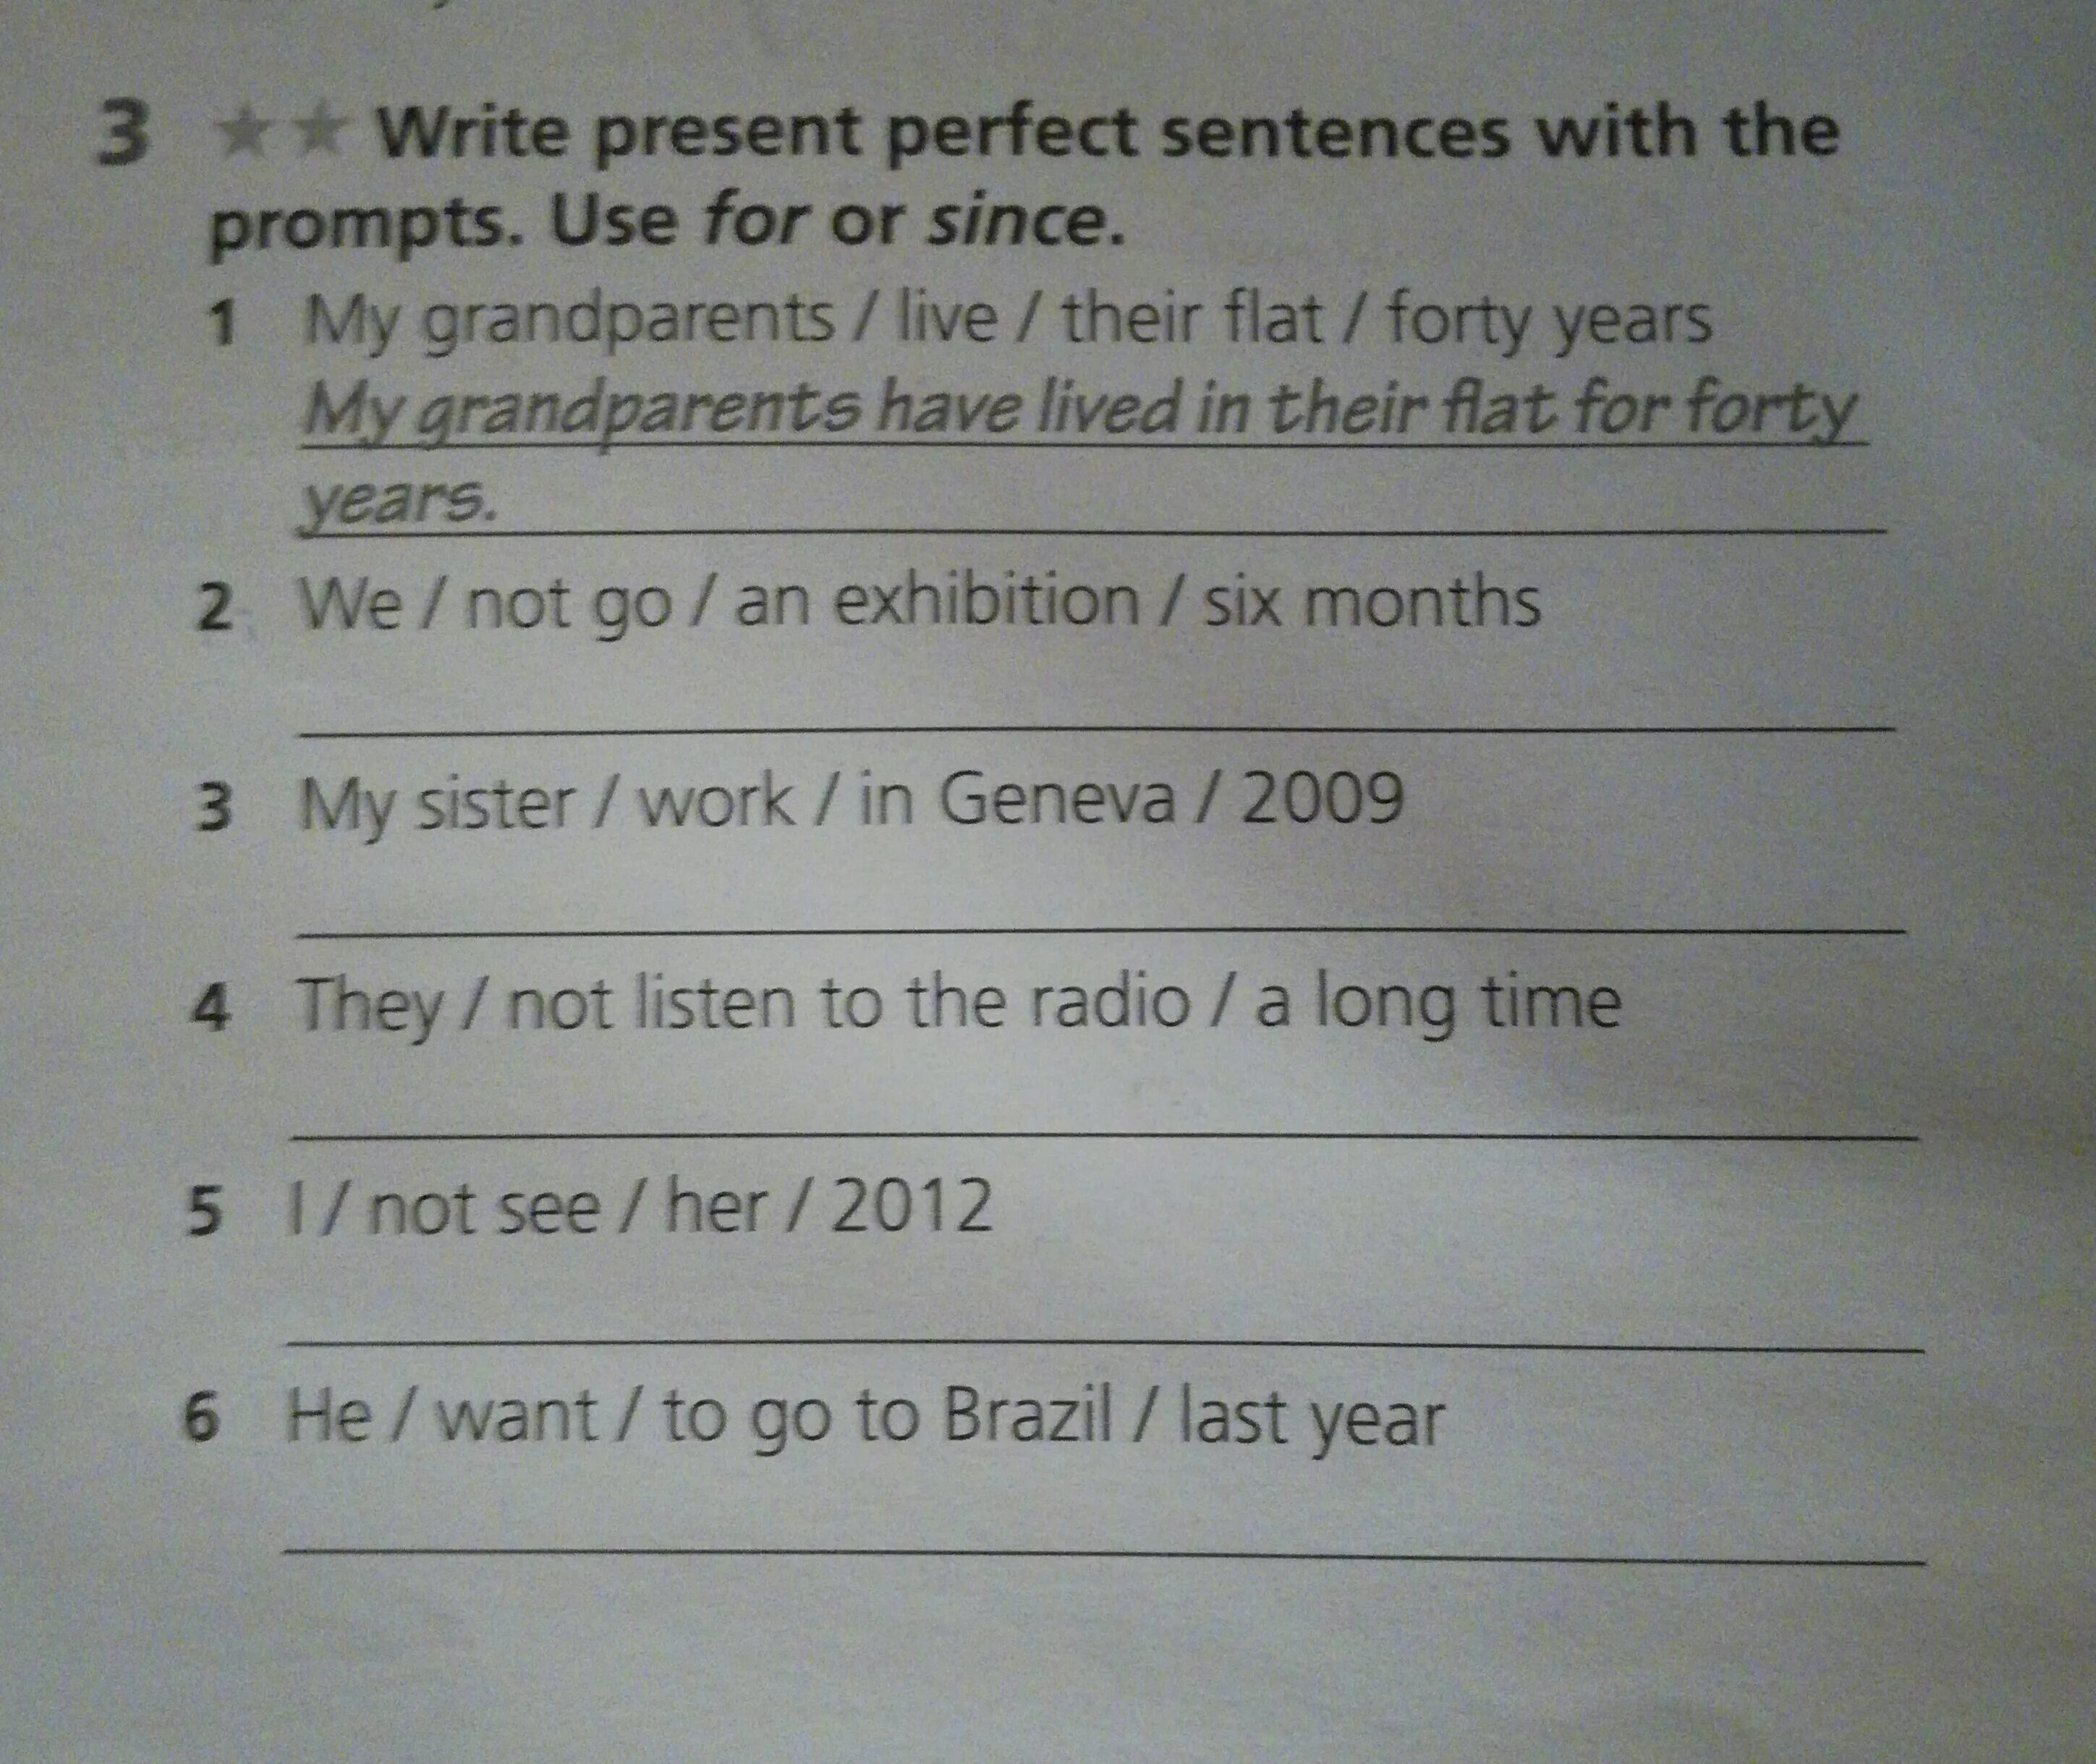 Use the prompts to write questions. Write в презент Перфект. Write the sentences using the present perfect. Present perfect sentences. Write sentences using the present perfect use the prompts.